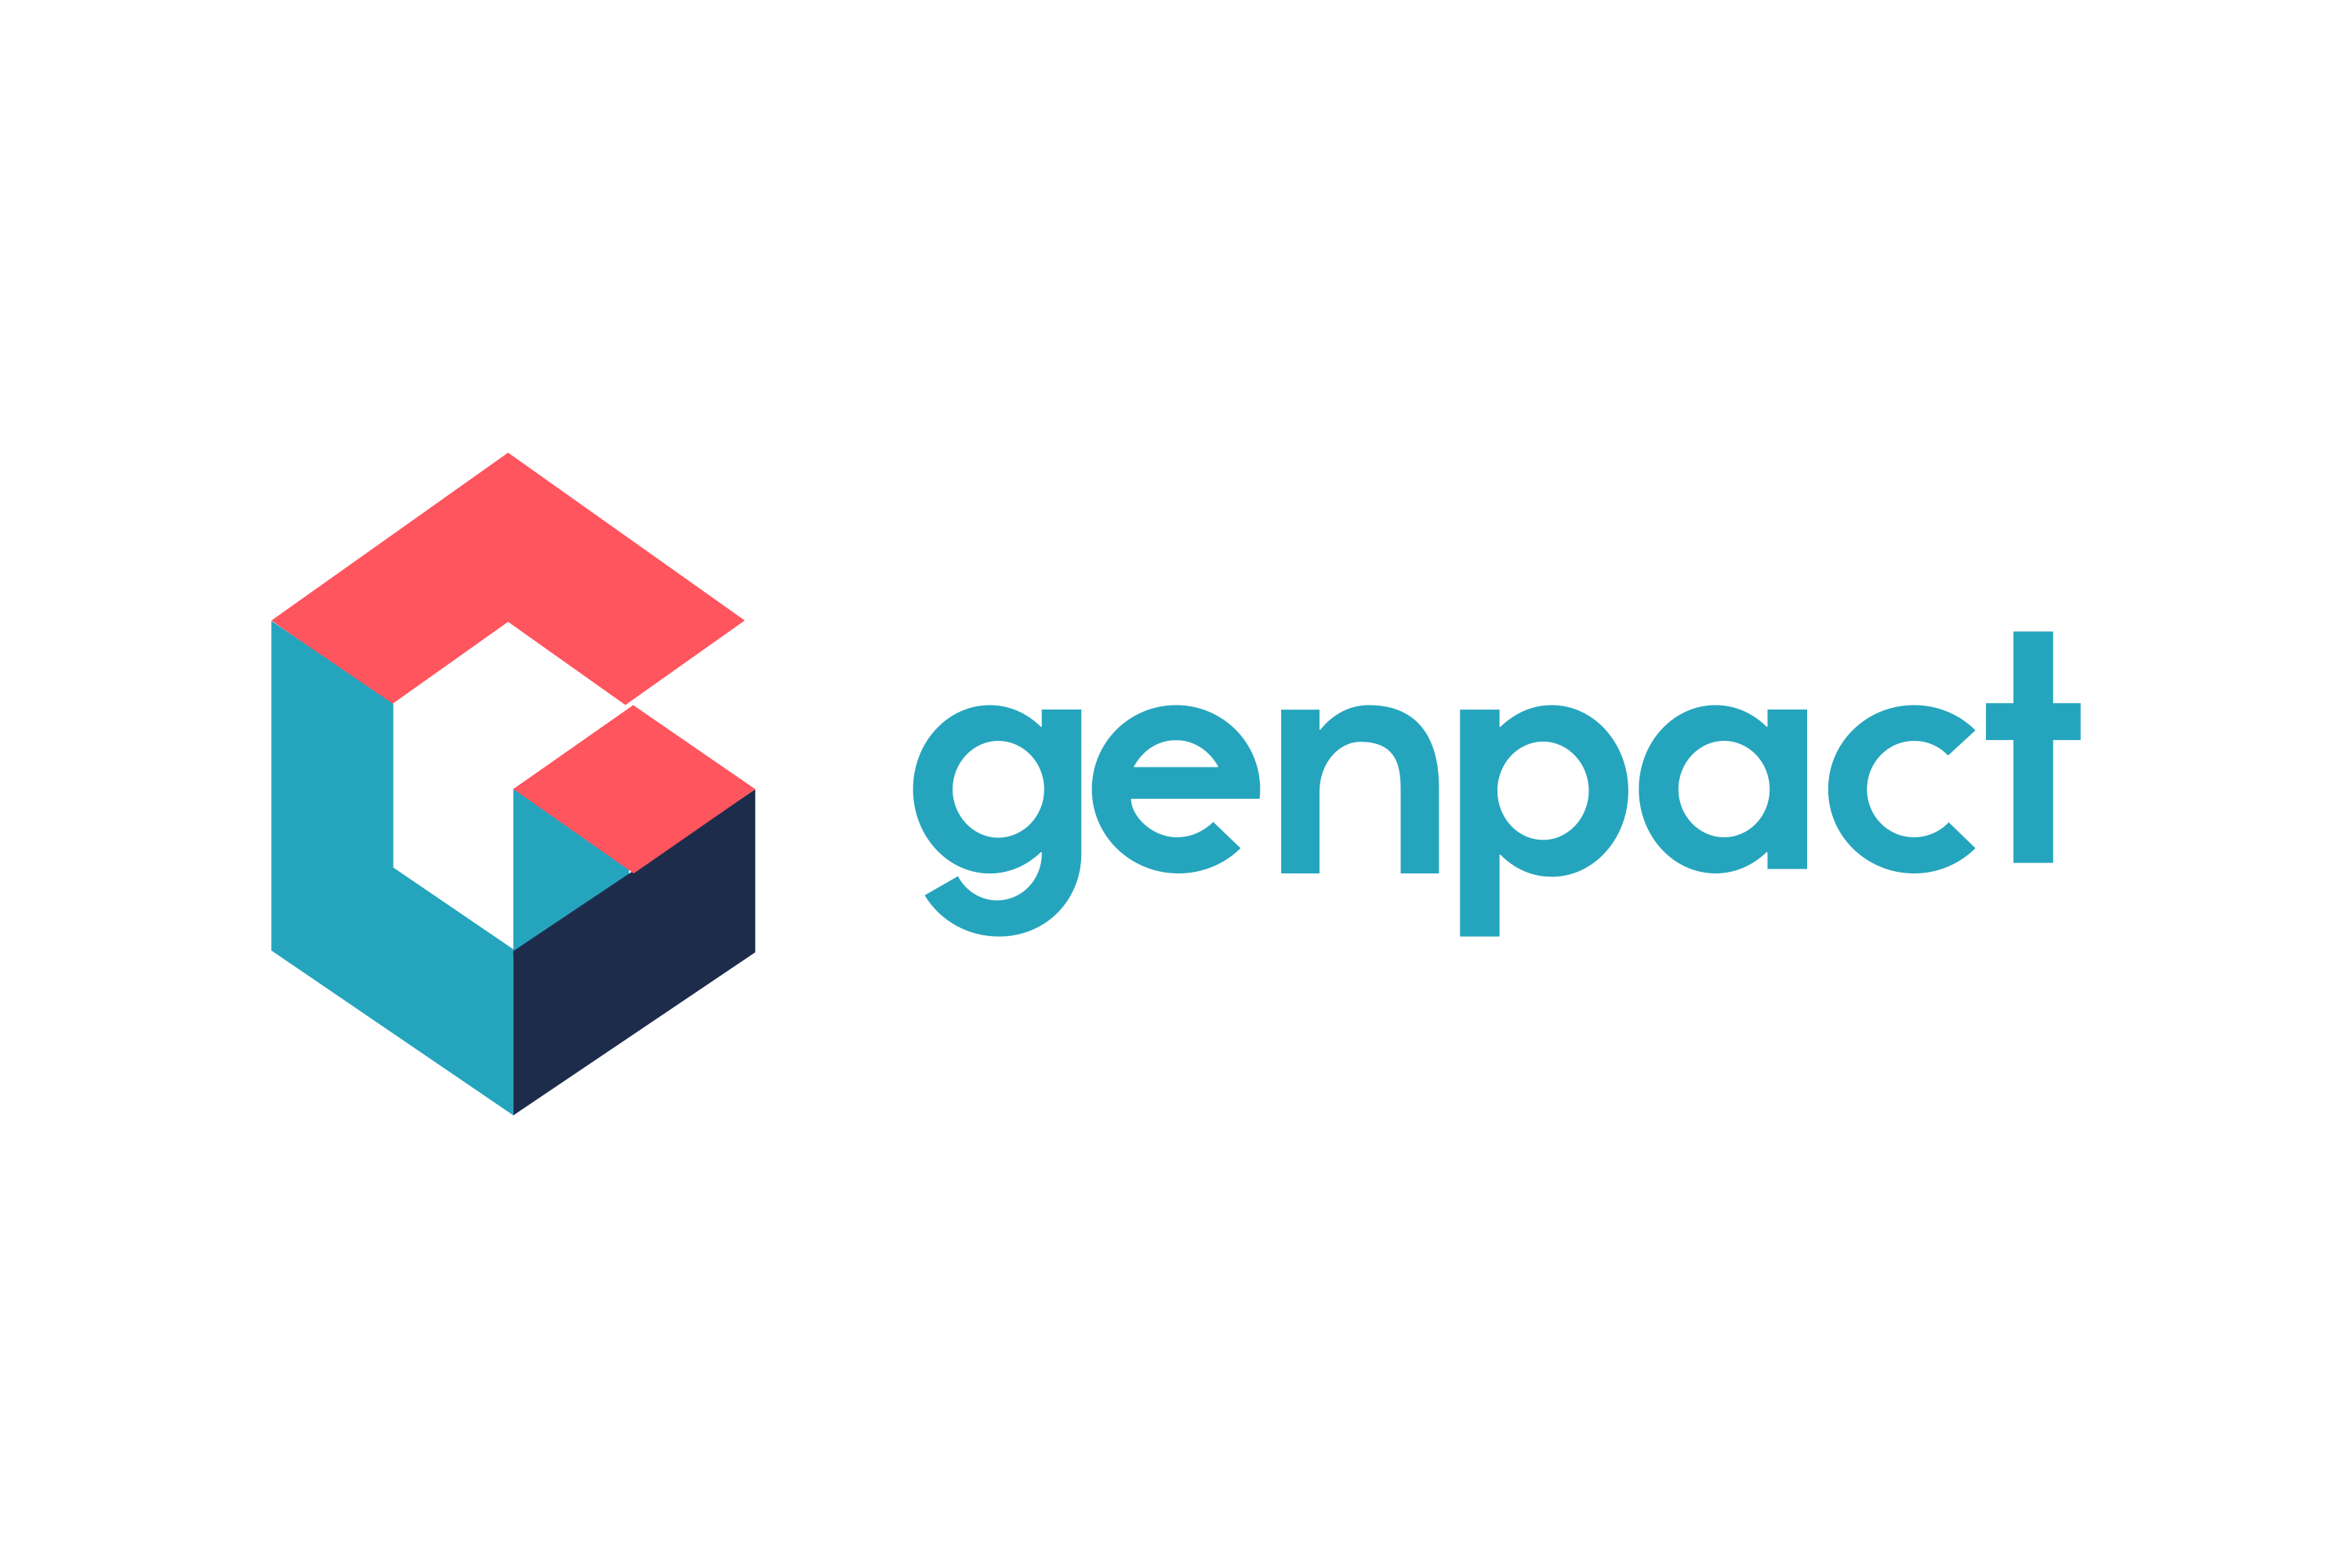 <strong>Genpact Hiring Management Trainee | Any Graduate |</strong>